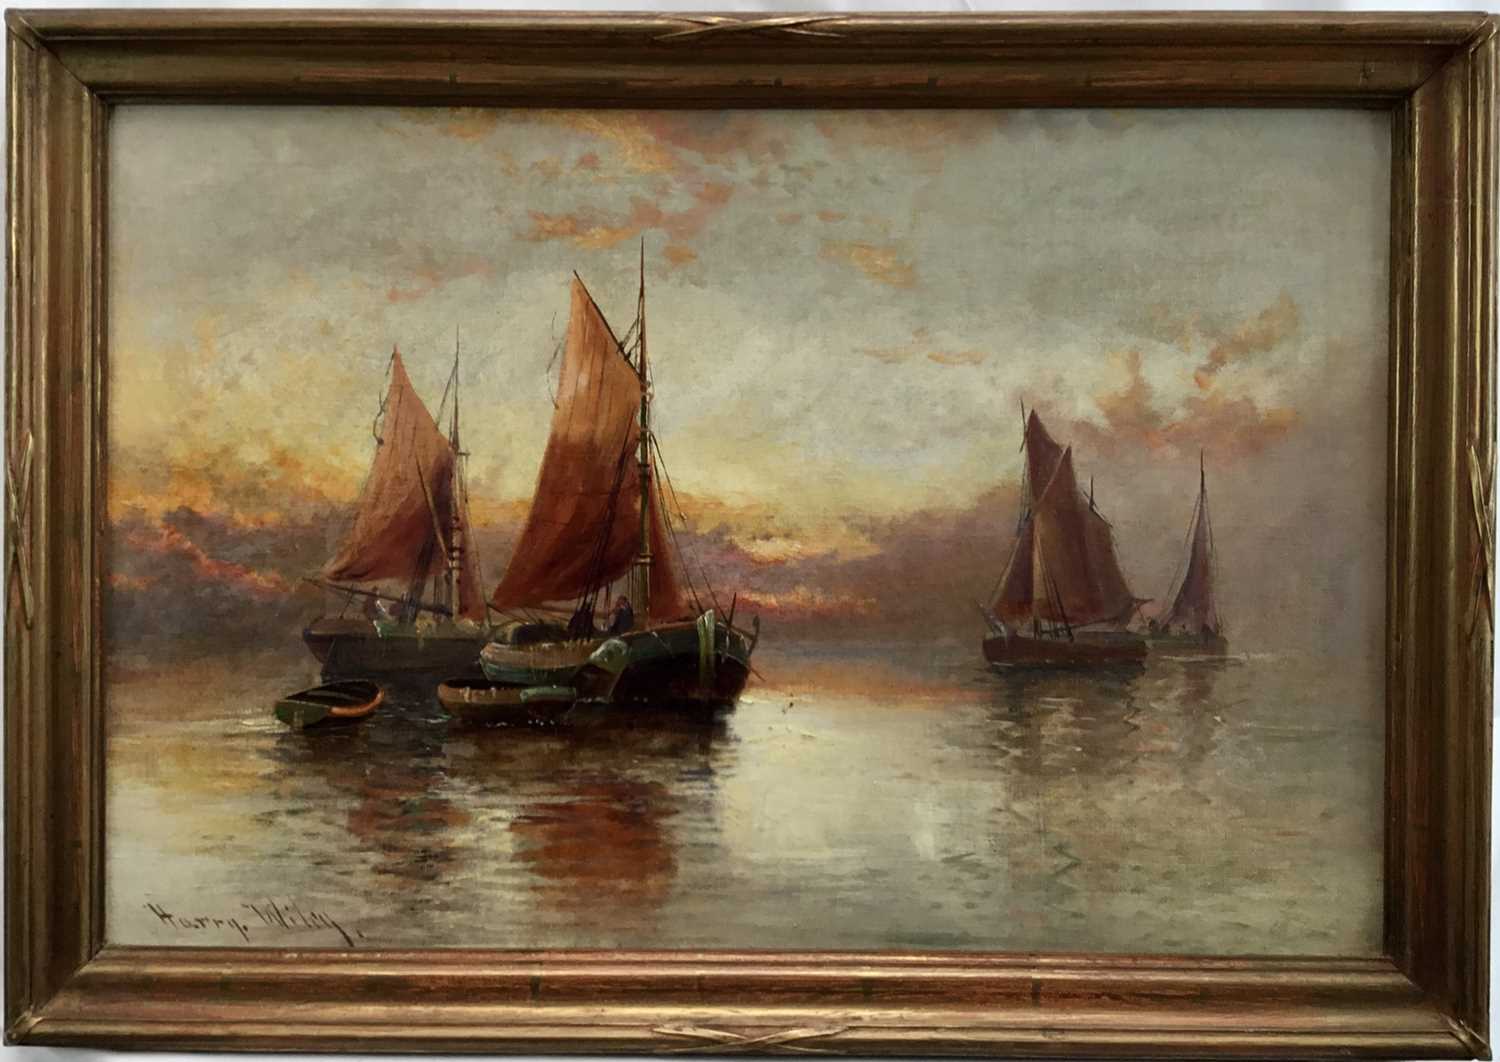 Lot 16 - Harry Wiley oil on canvas - fishing boats at sunset, 40cm x 60cm in gilt frame